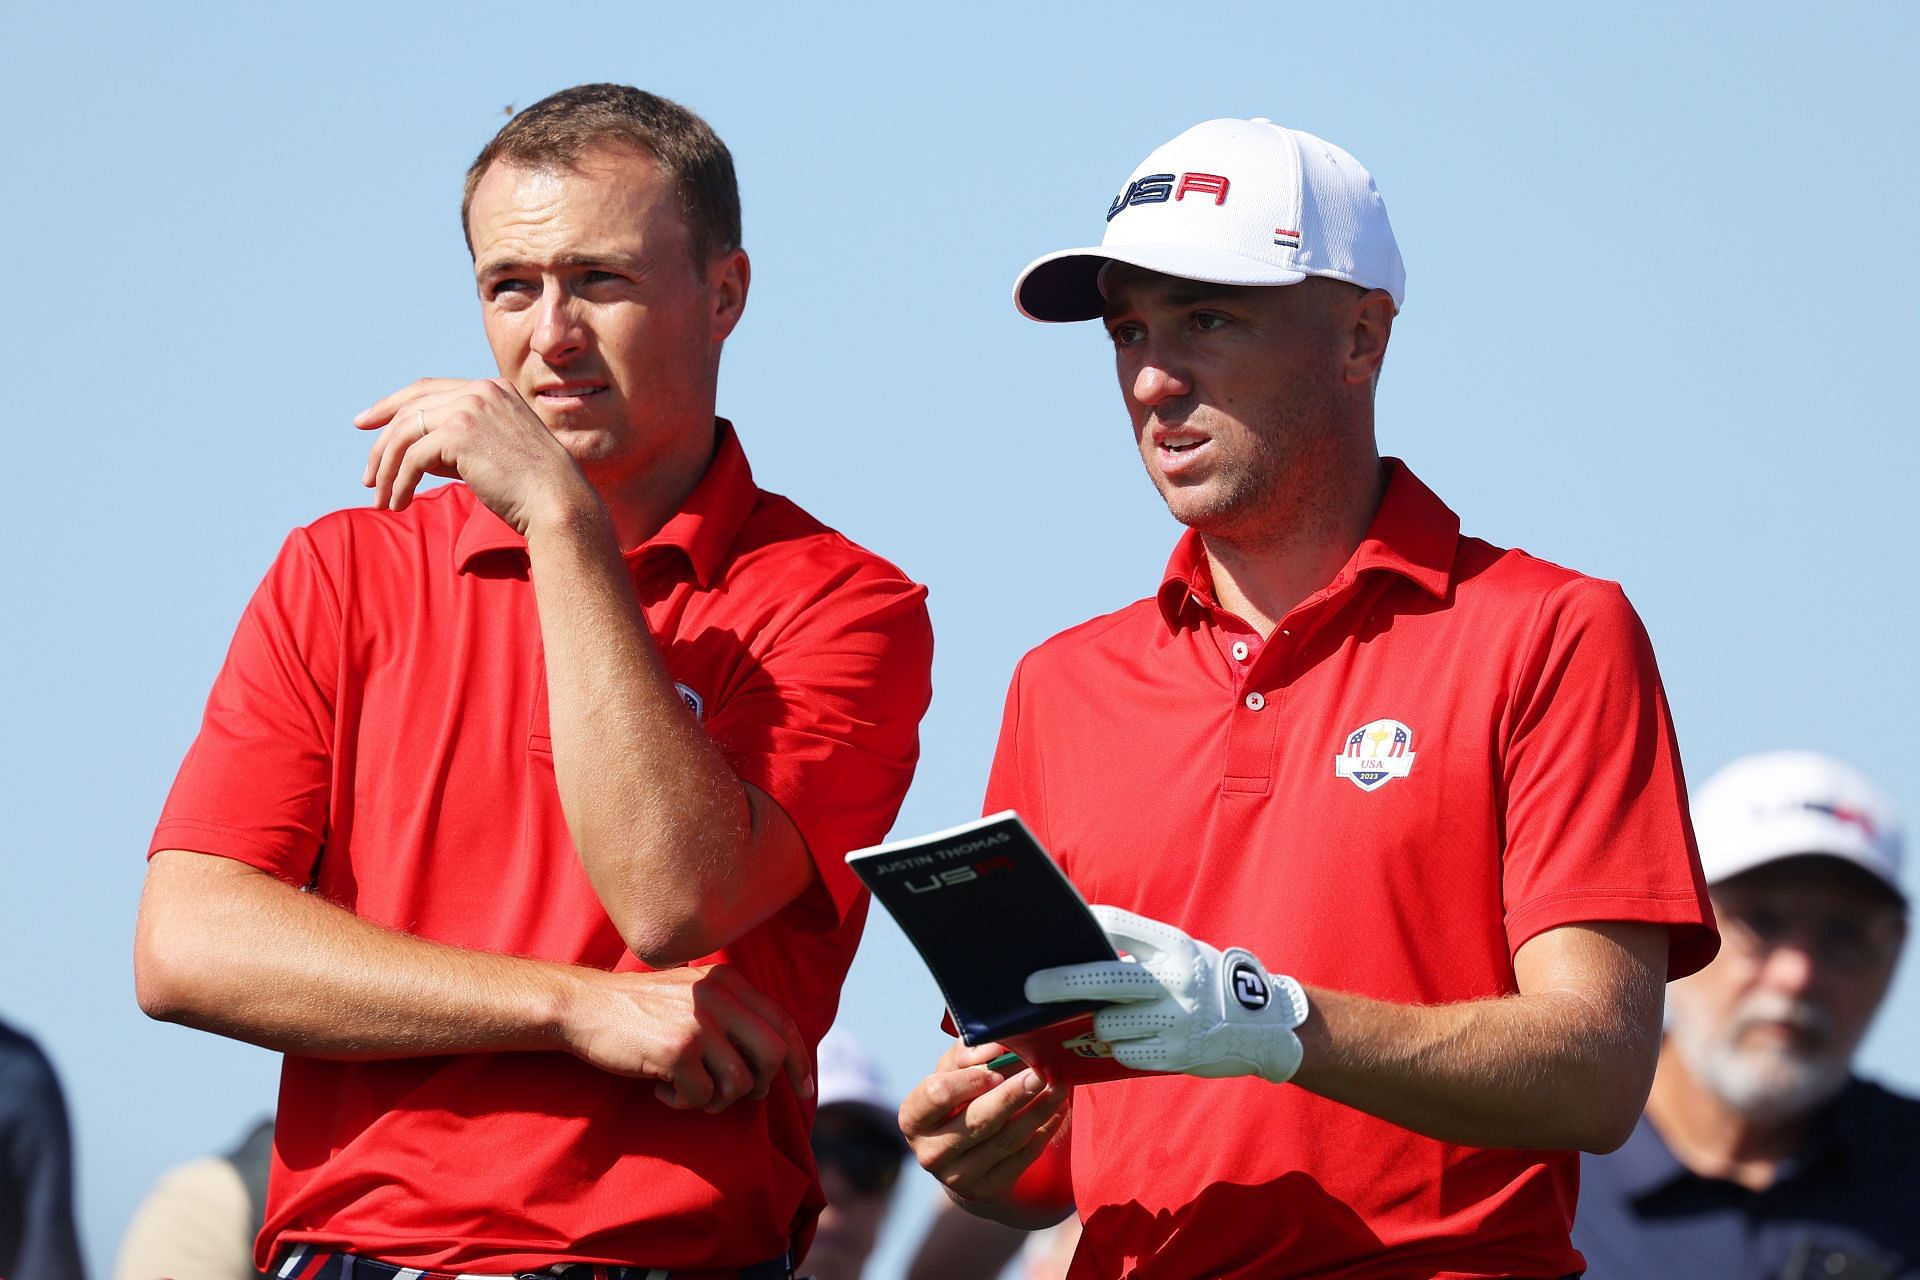 Jordan Spieth and Justin Thomas prepare for the Ryder Cup.